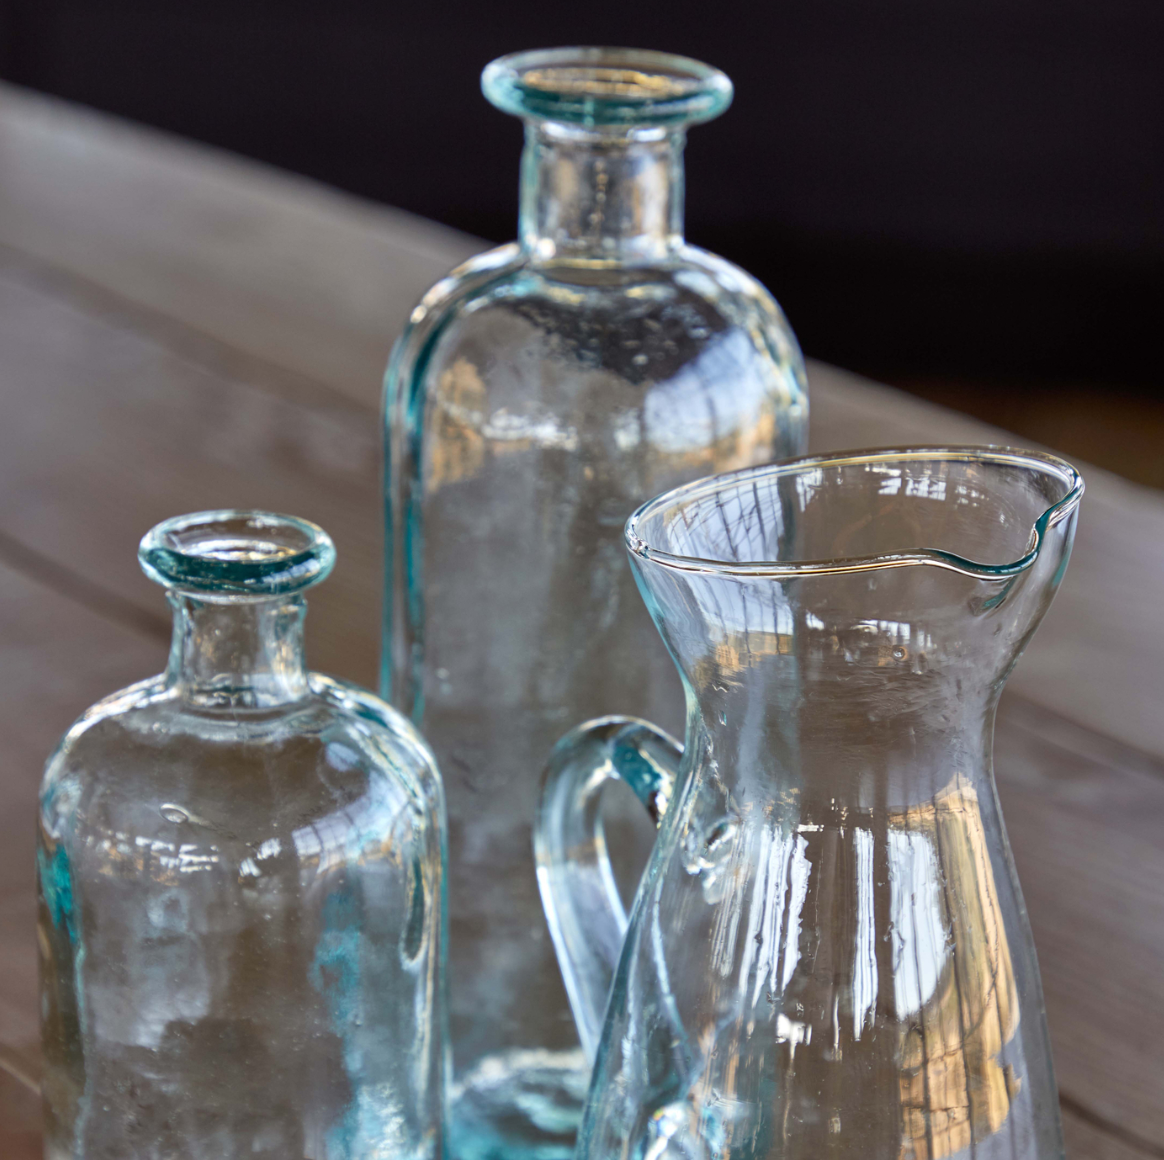 Recycled Glass Pitcher